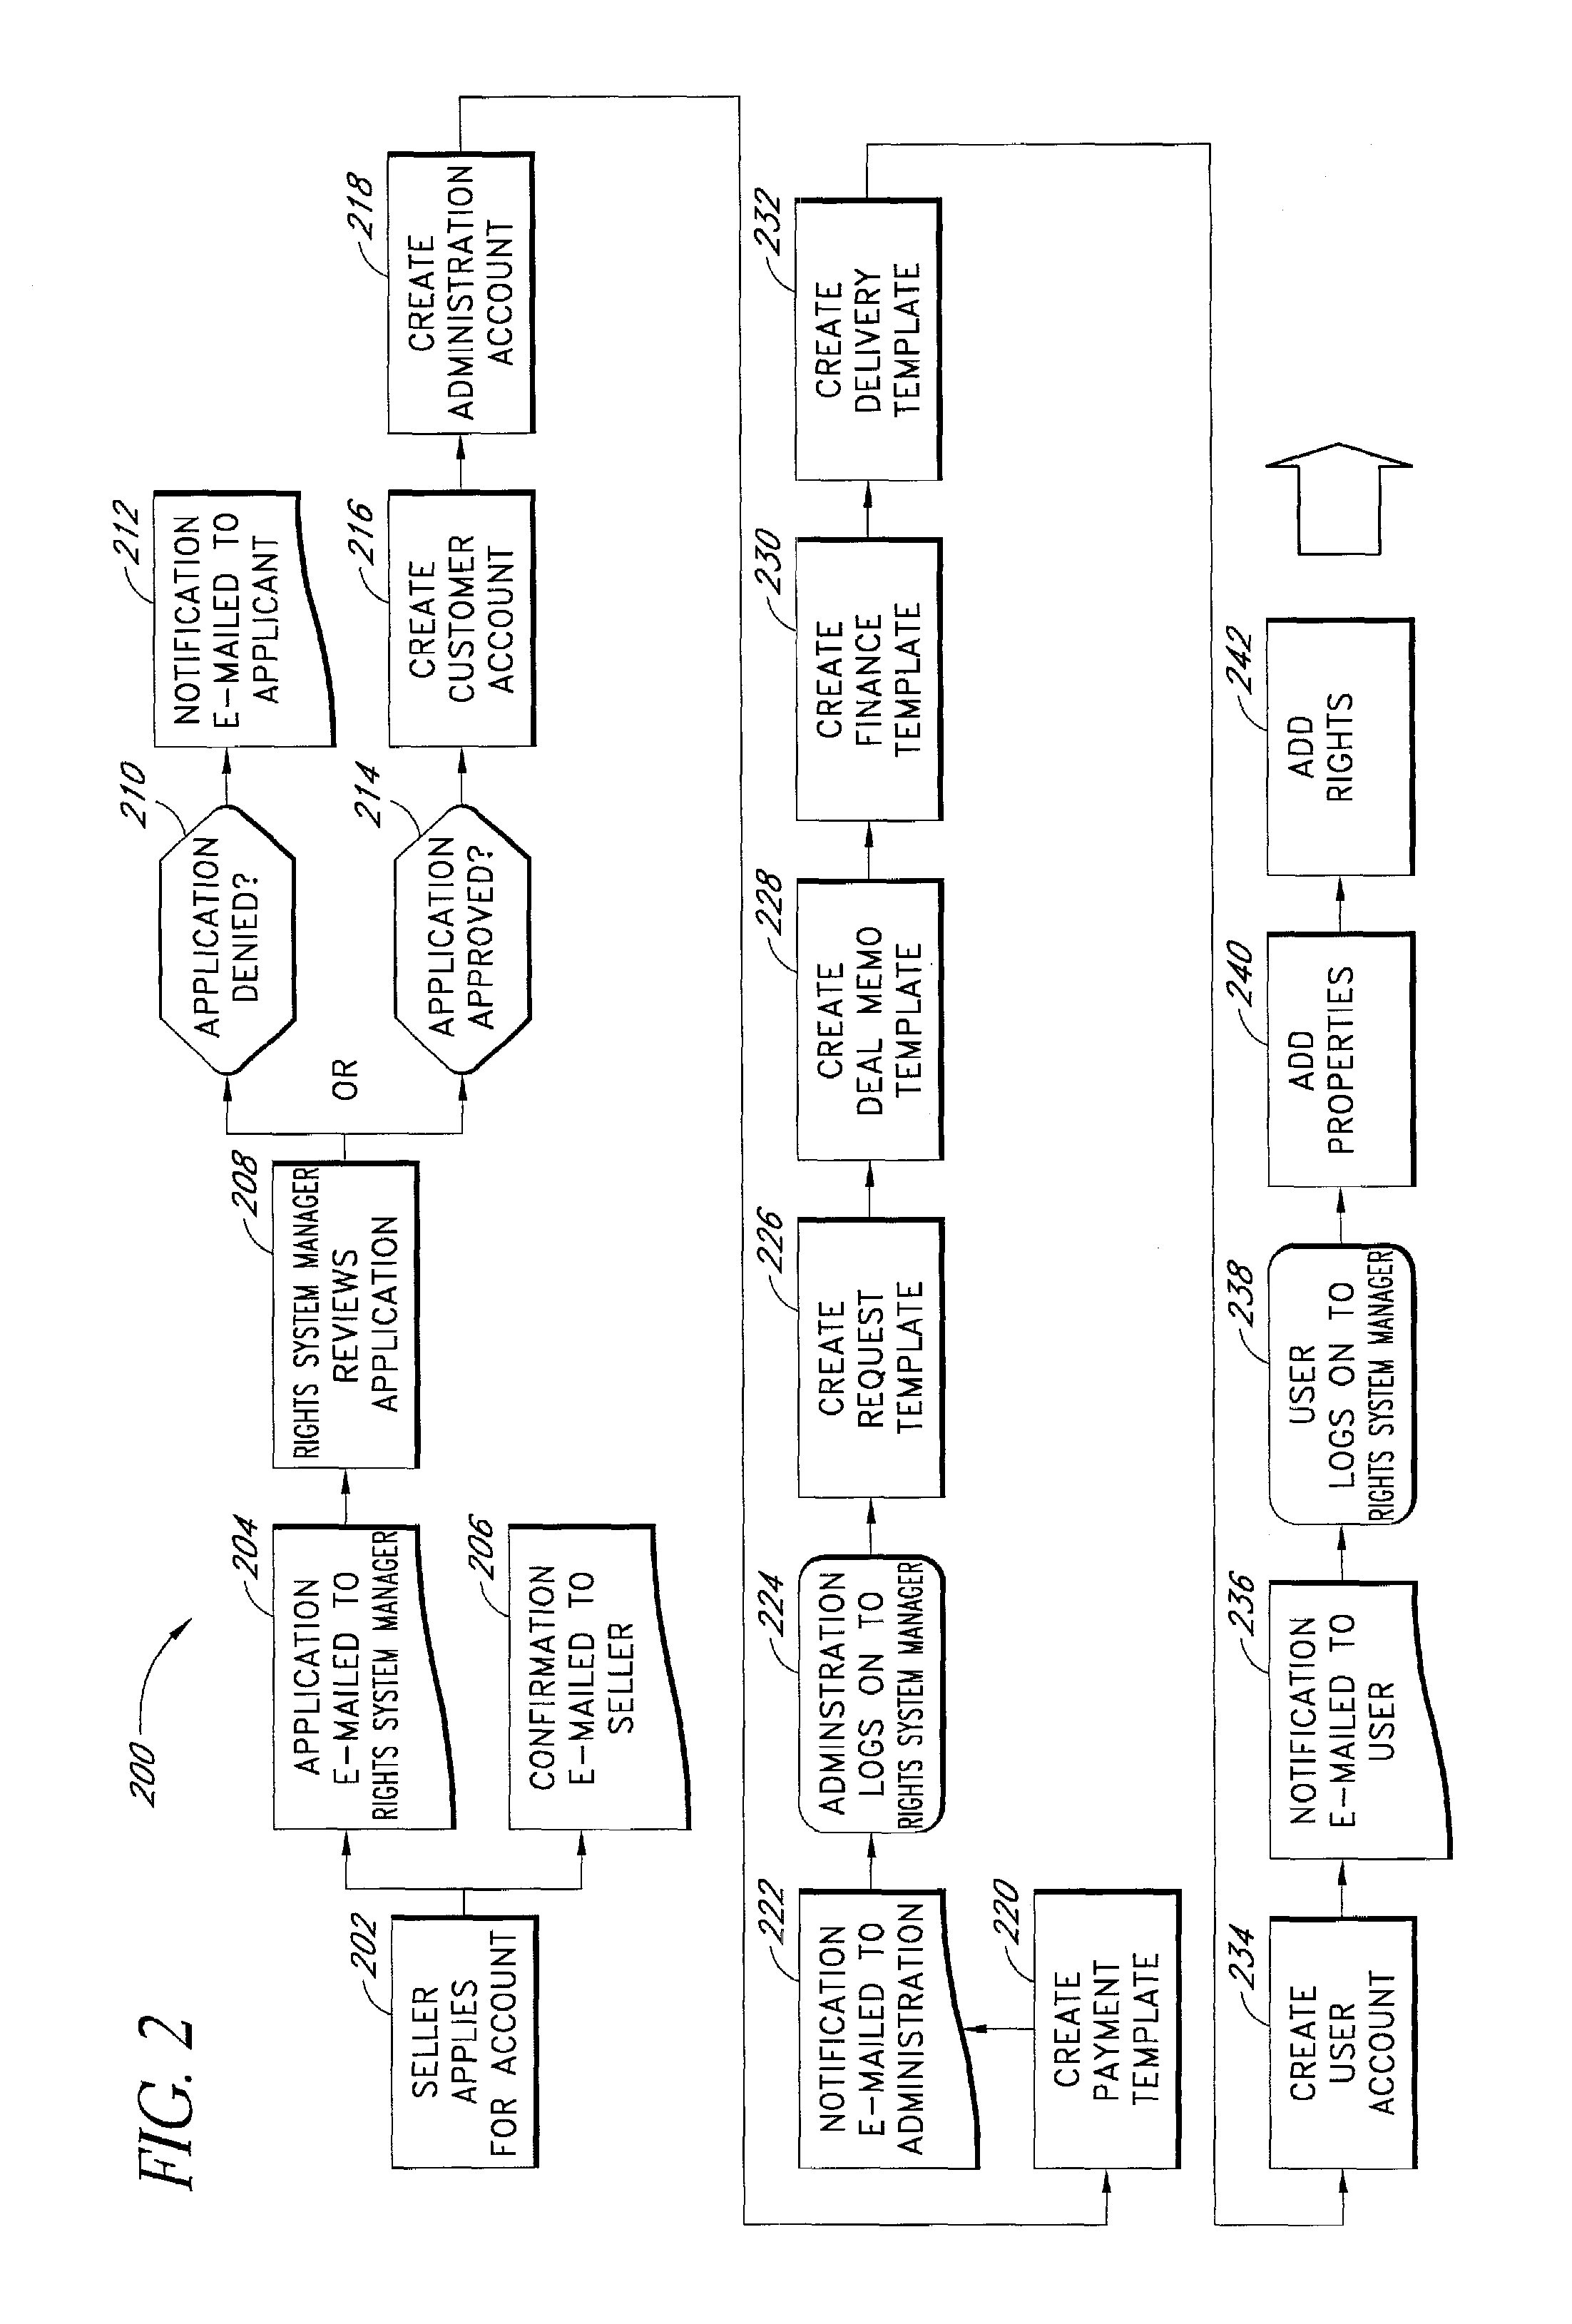 Apparatus and methods for intellectual property database navigation